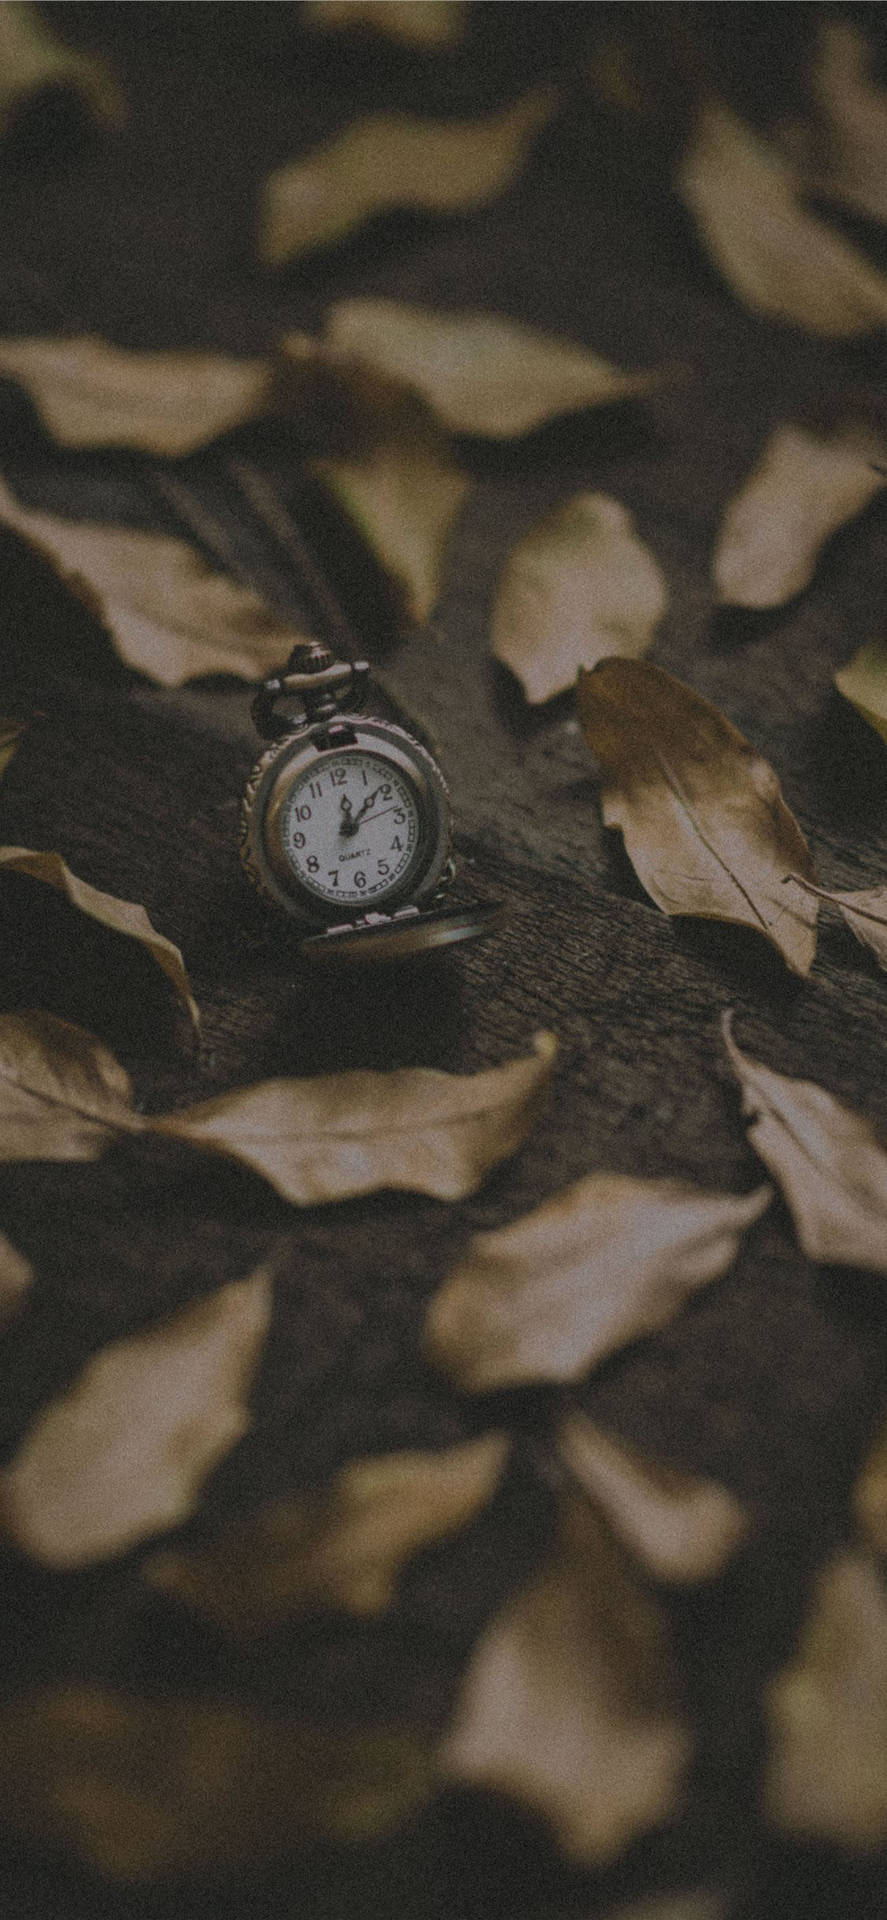 Autumn Iphone Foliage And Pocket Watch Wallpaper